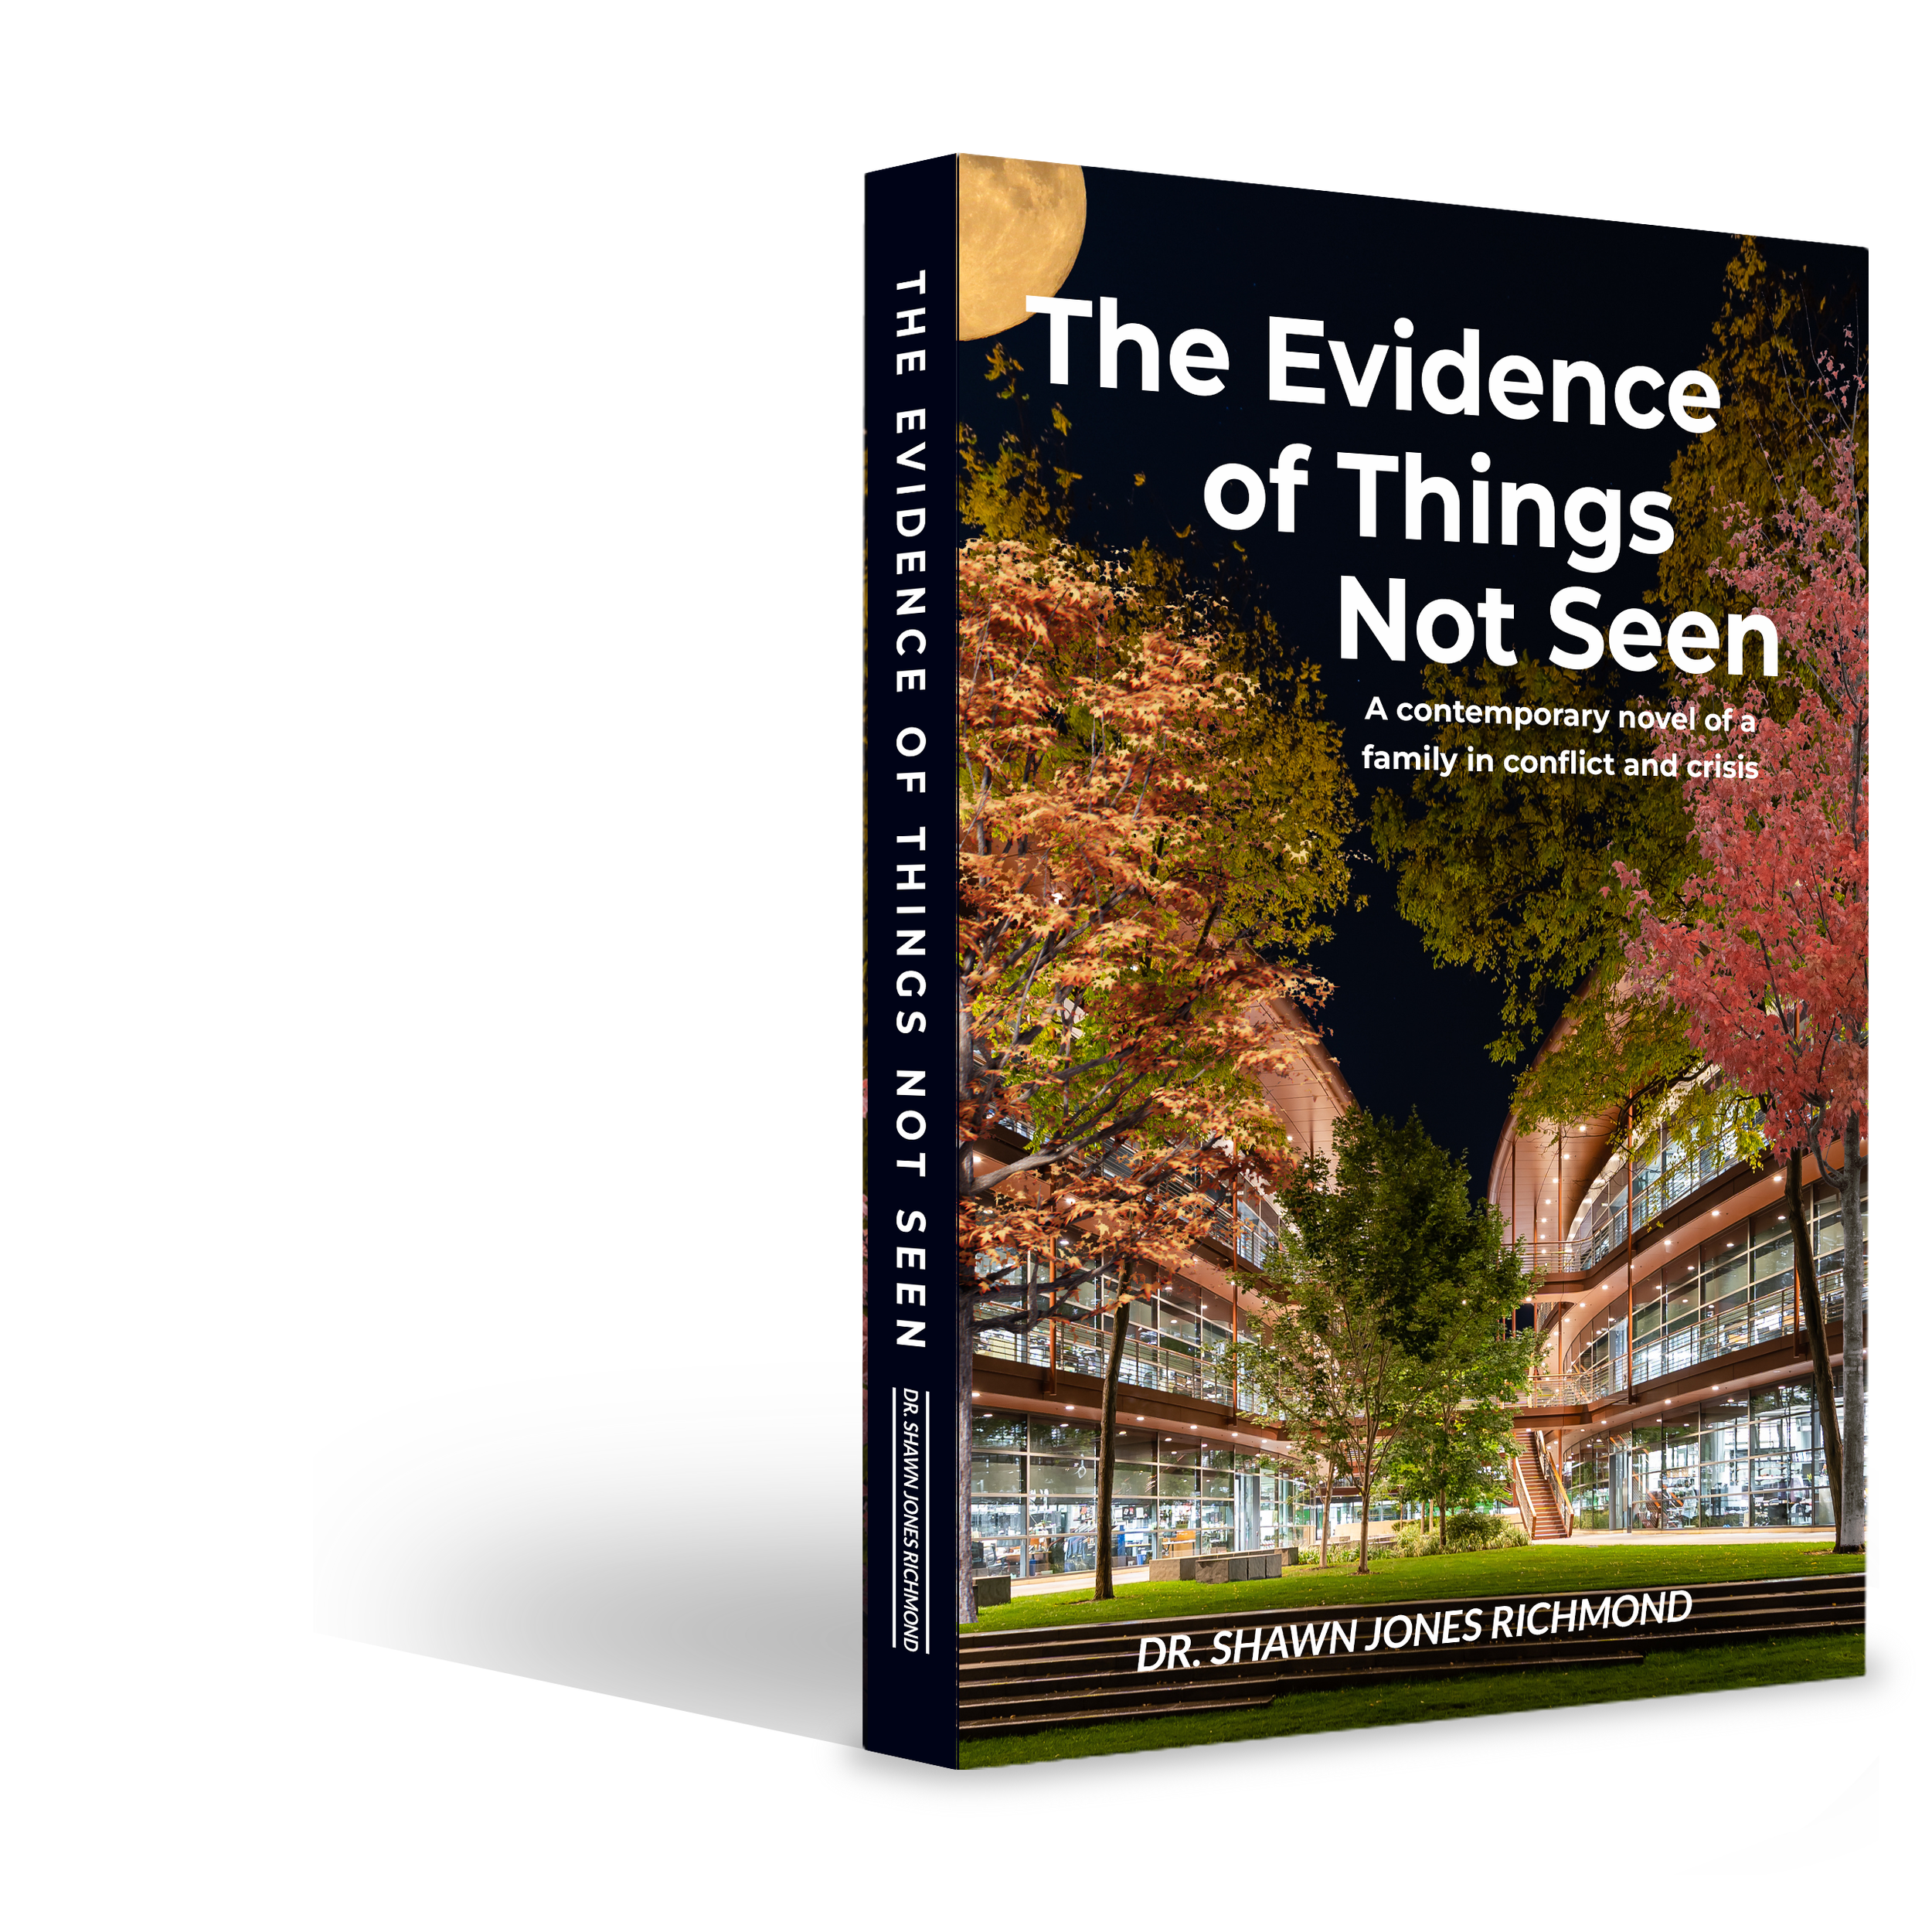 (Novel) The Evidence of Things Not Seen (Book 1 of 2)